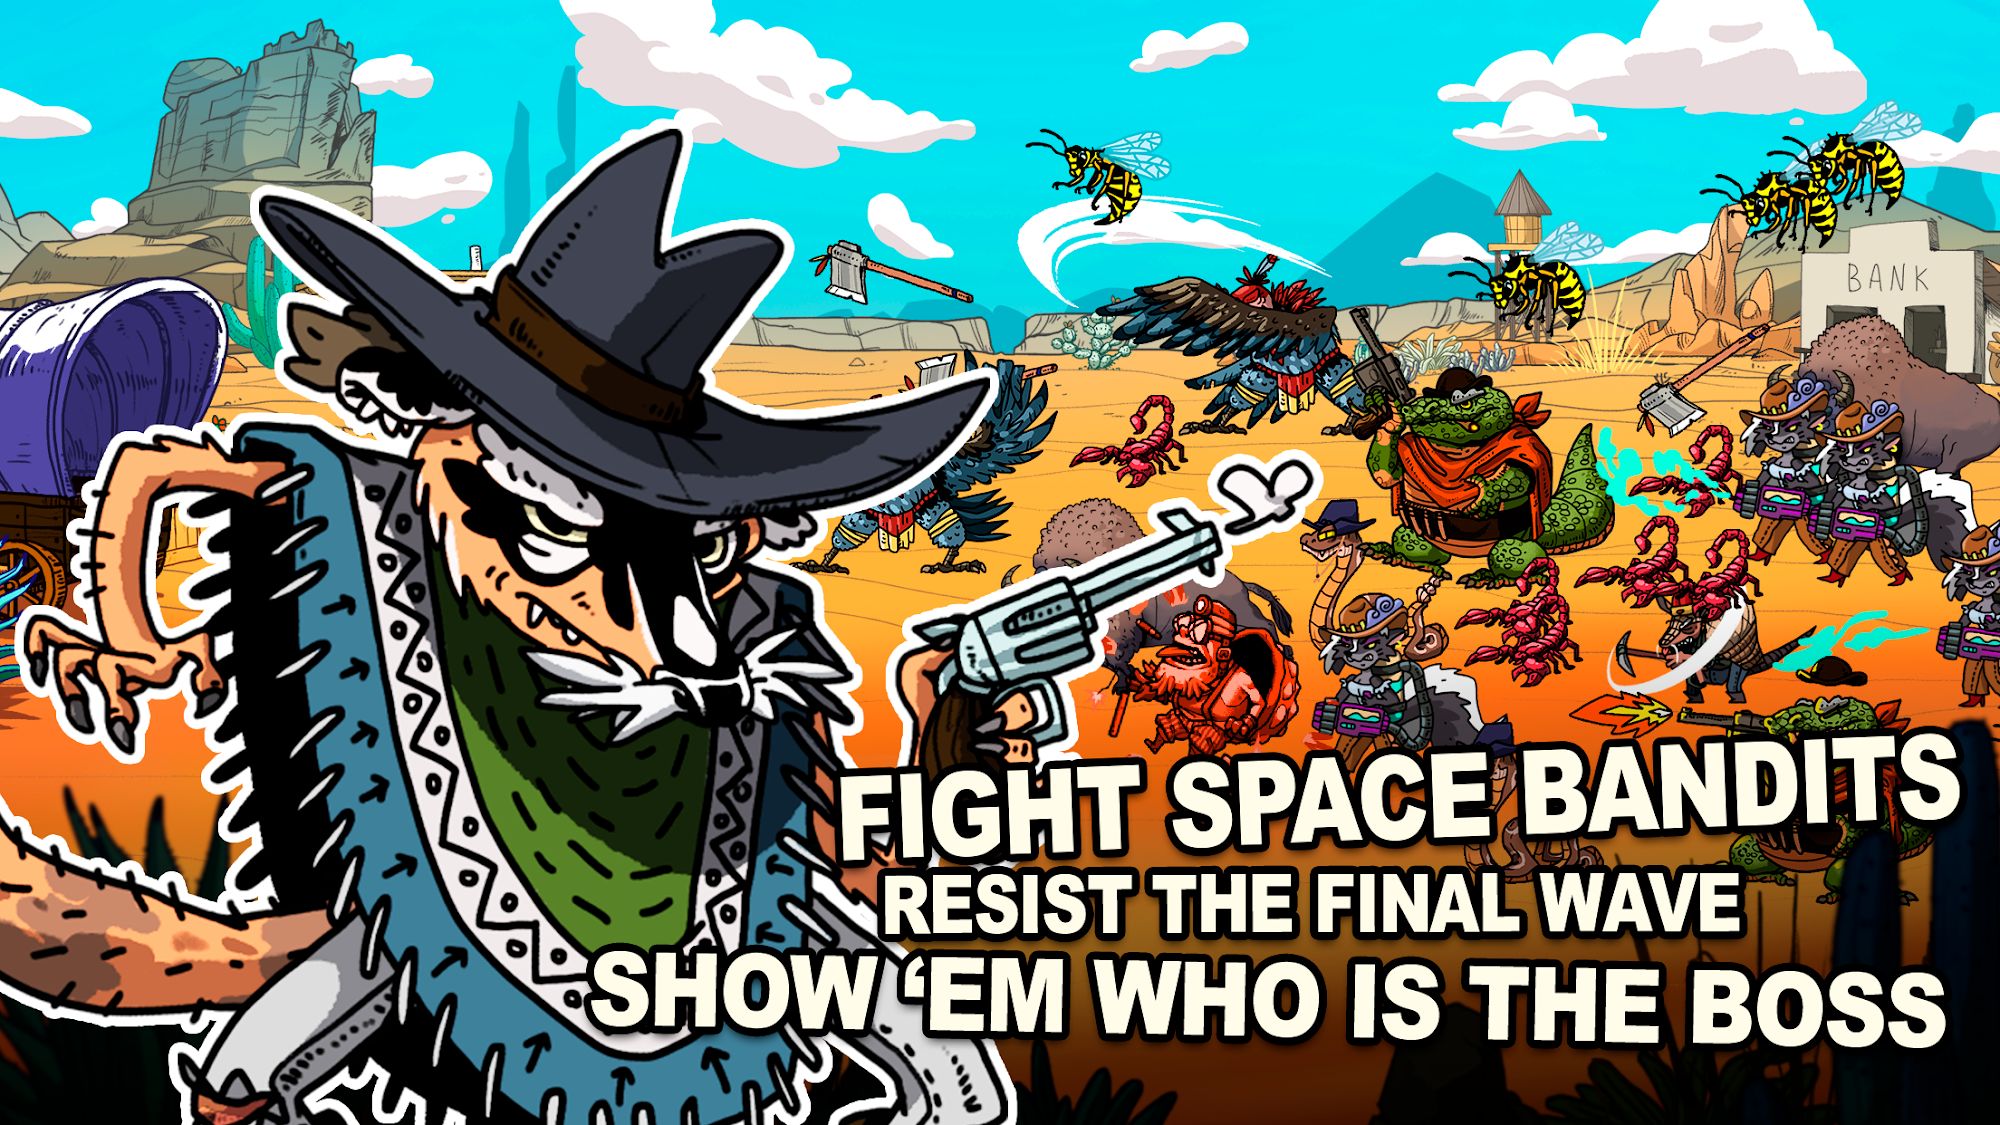 Cowboys Galaxy Adventures for Android